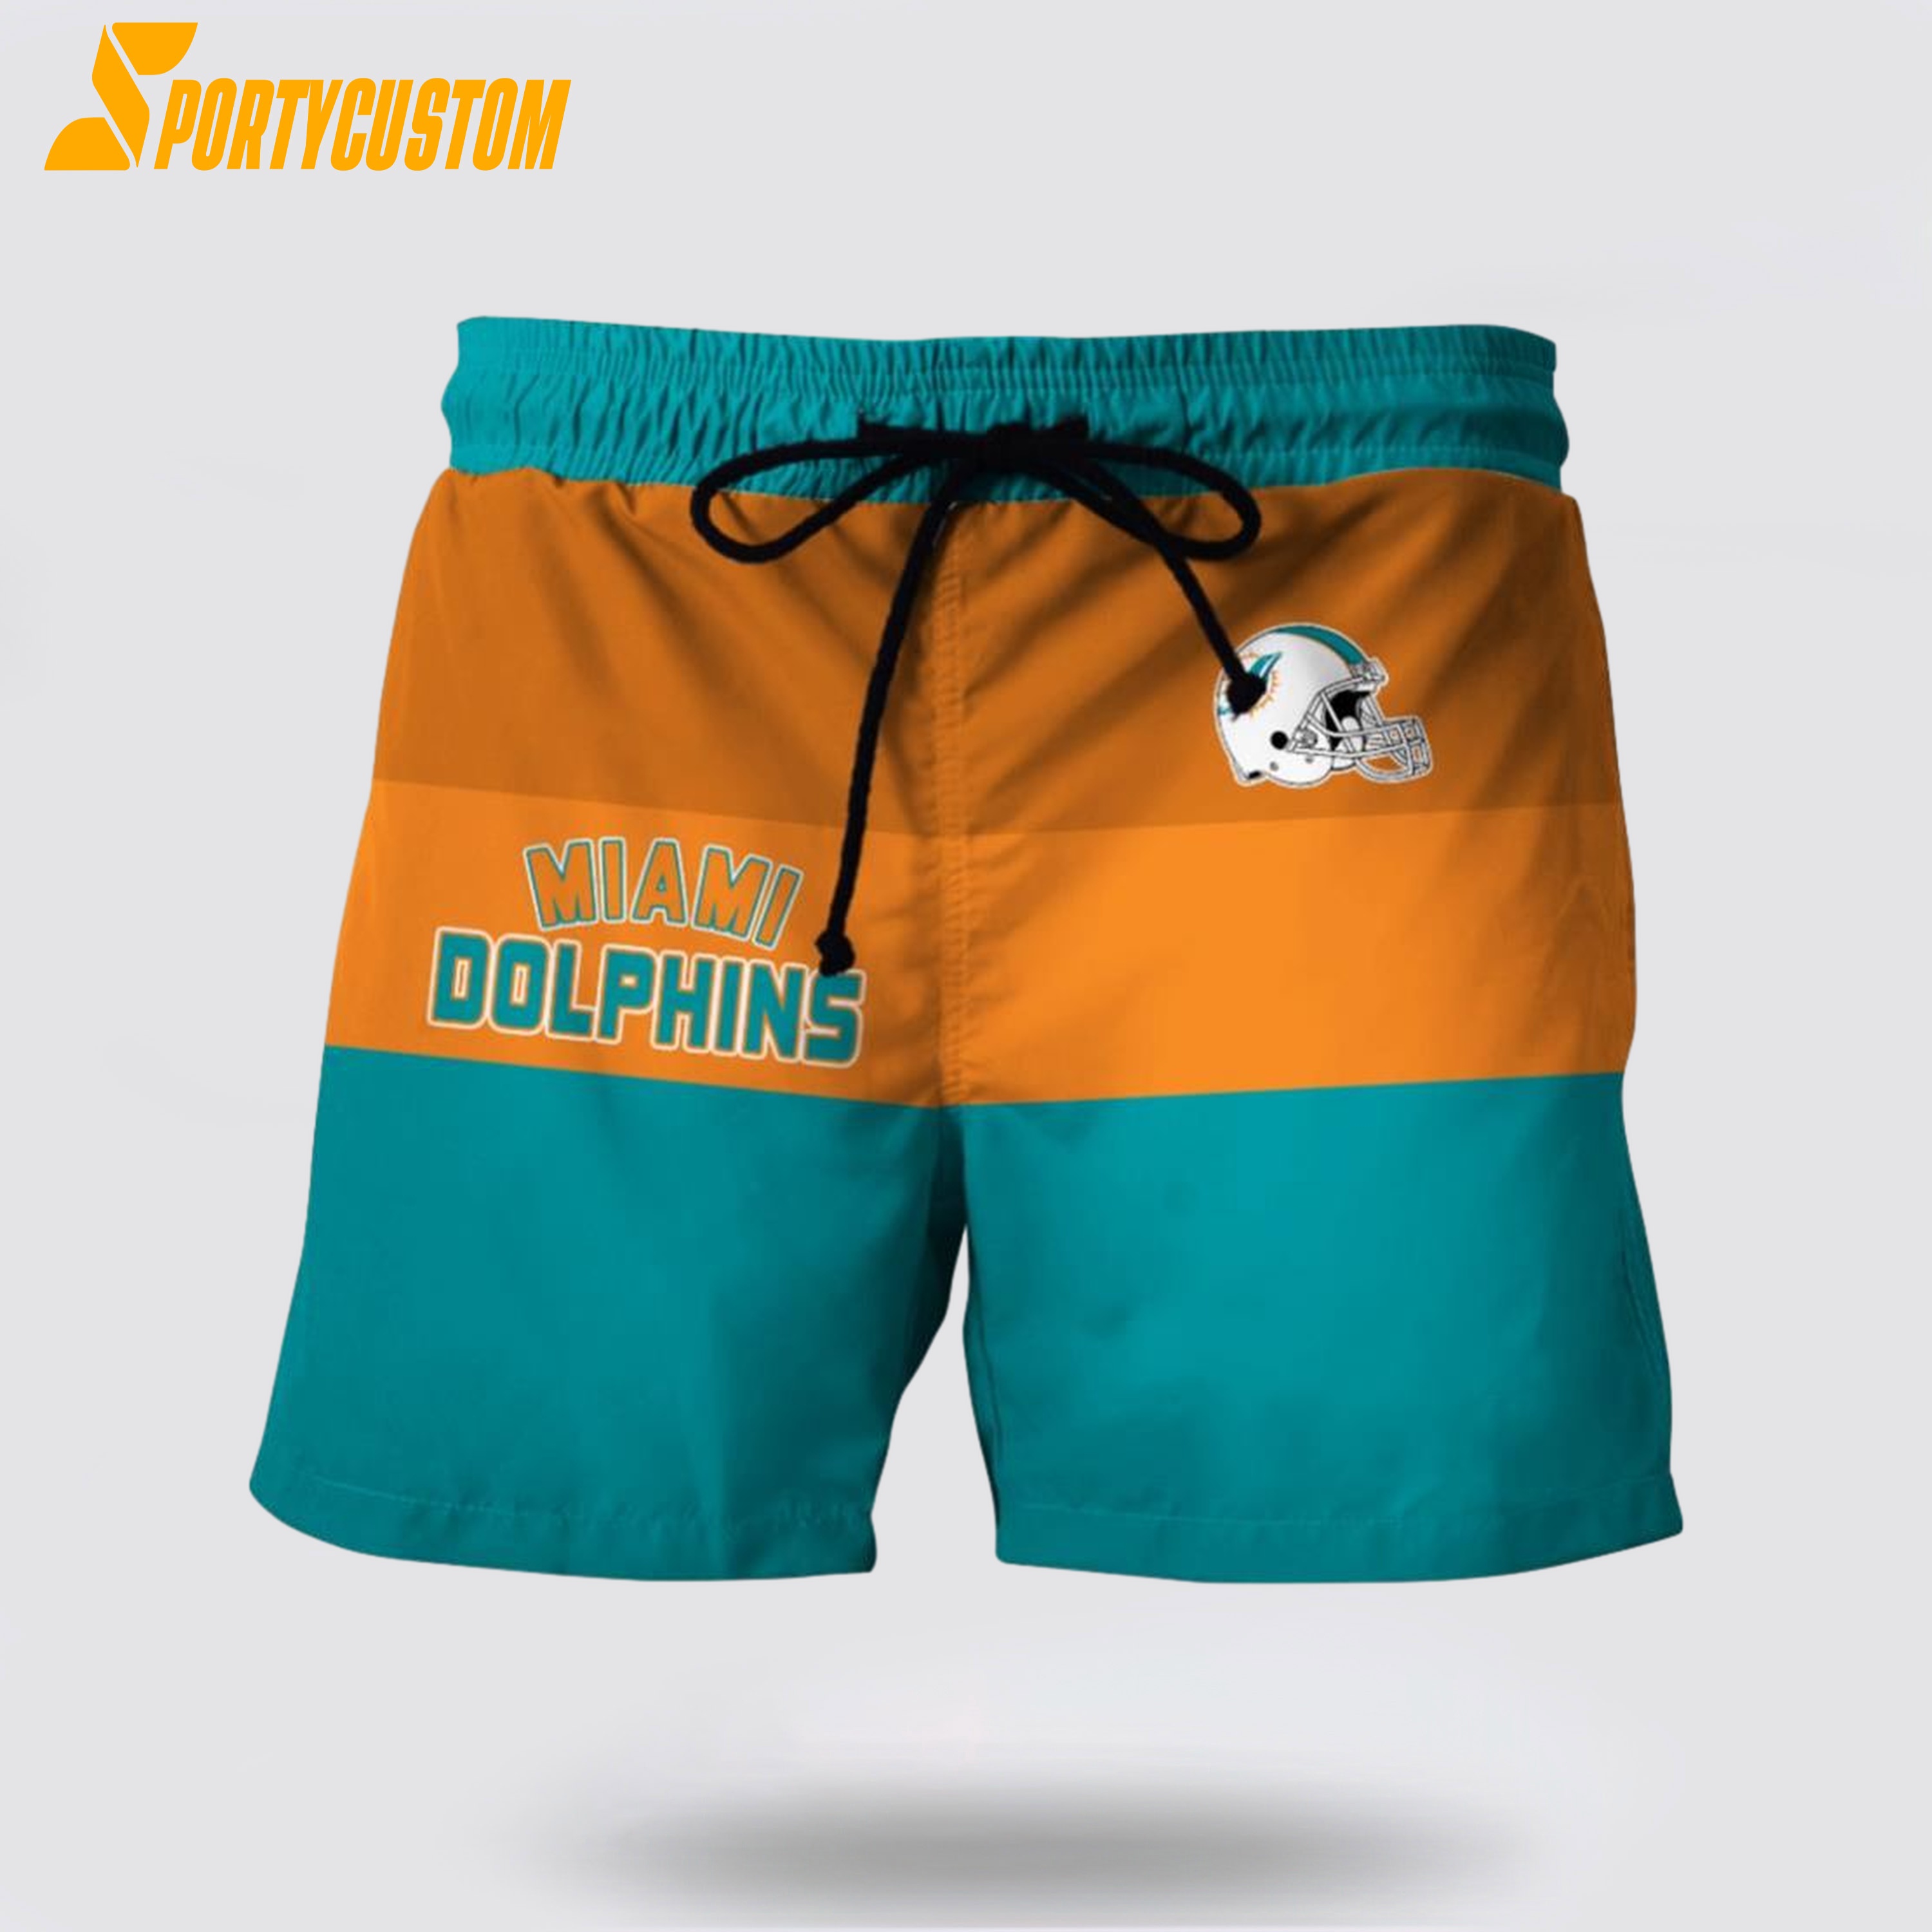 Miami Dolphins Shop - Miami Dolphins Mens Nfl Beach Board Shorts Show Your Team Pride In Style